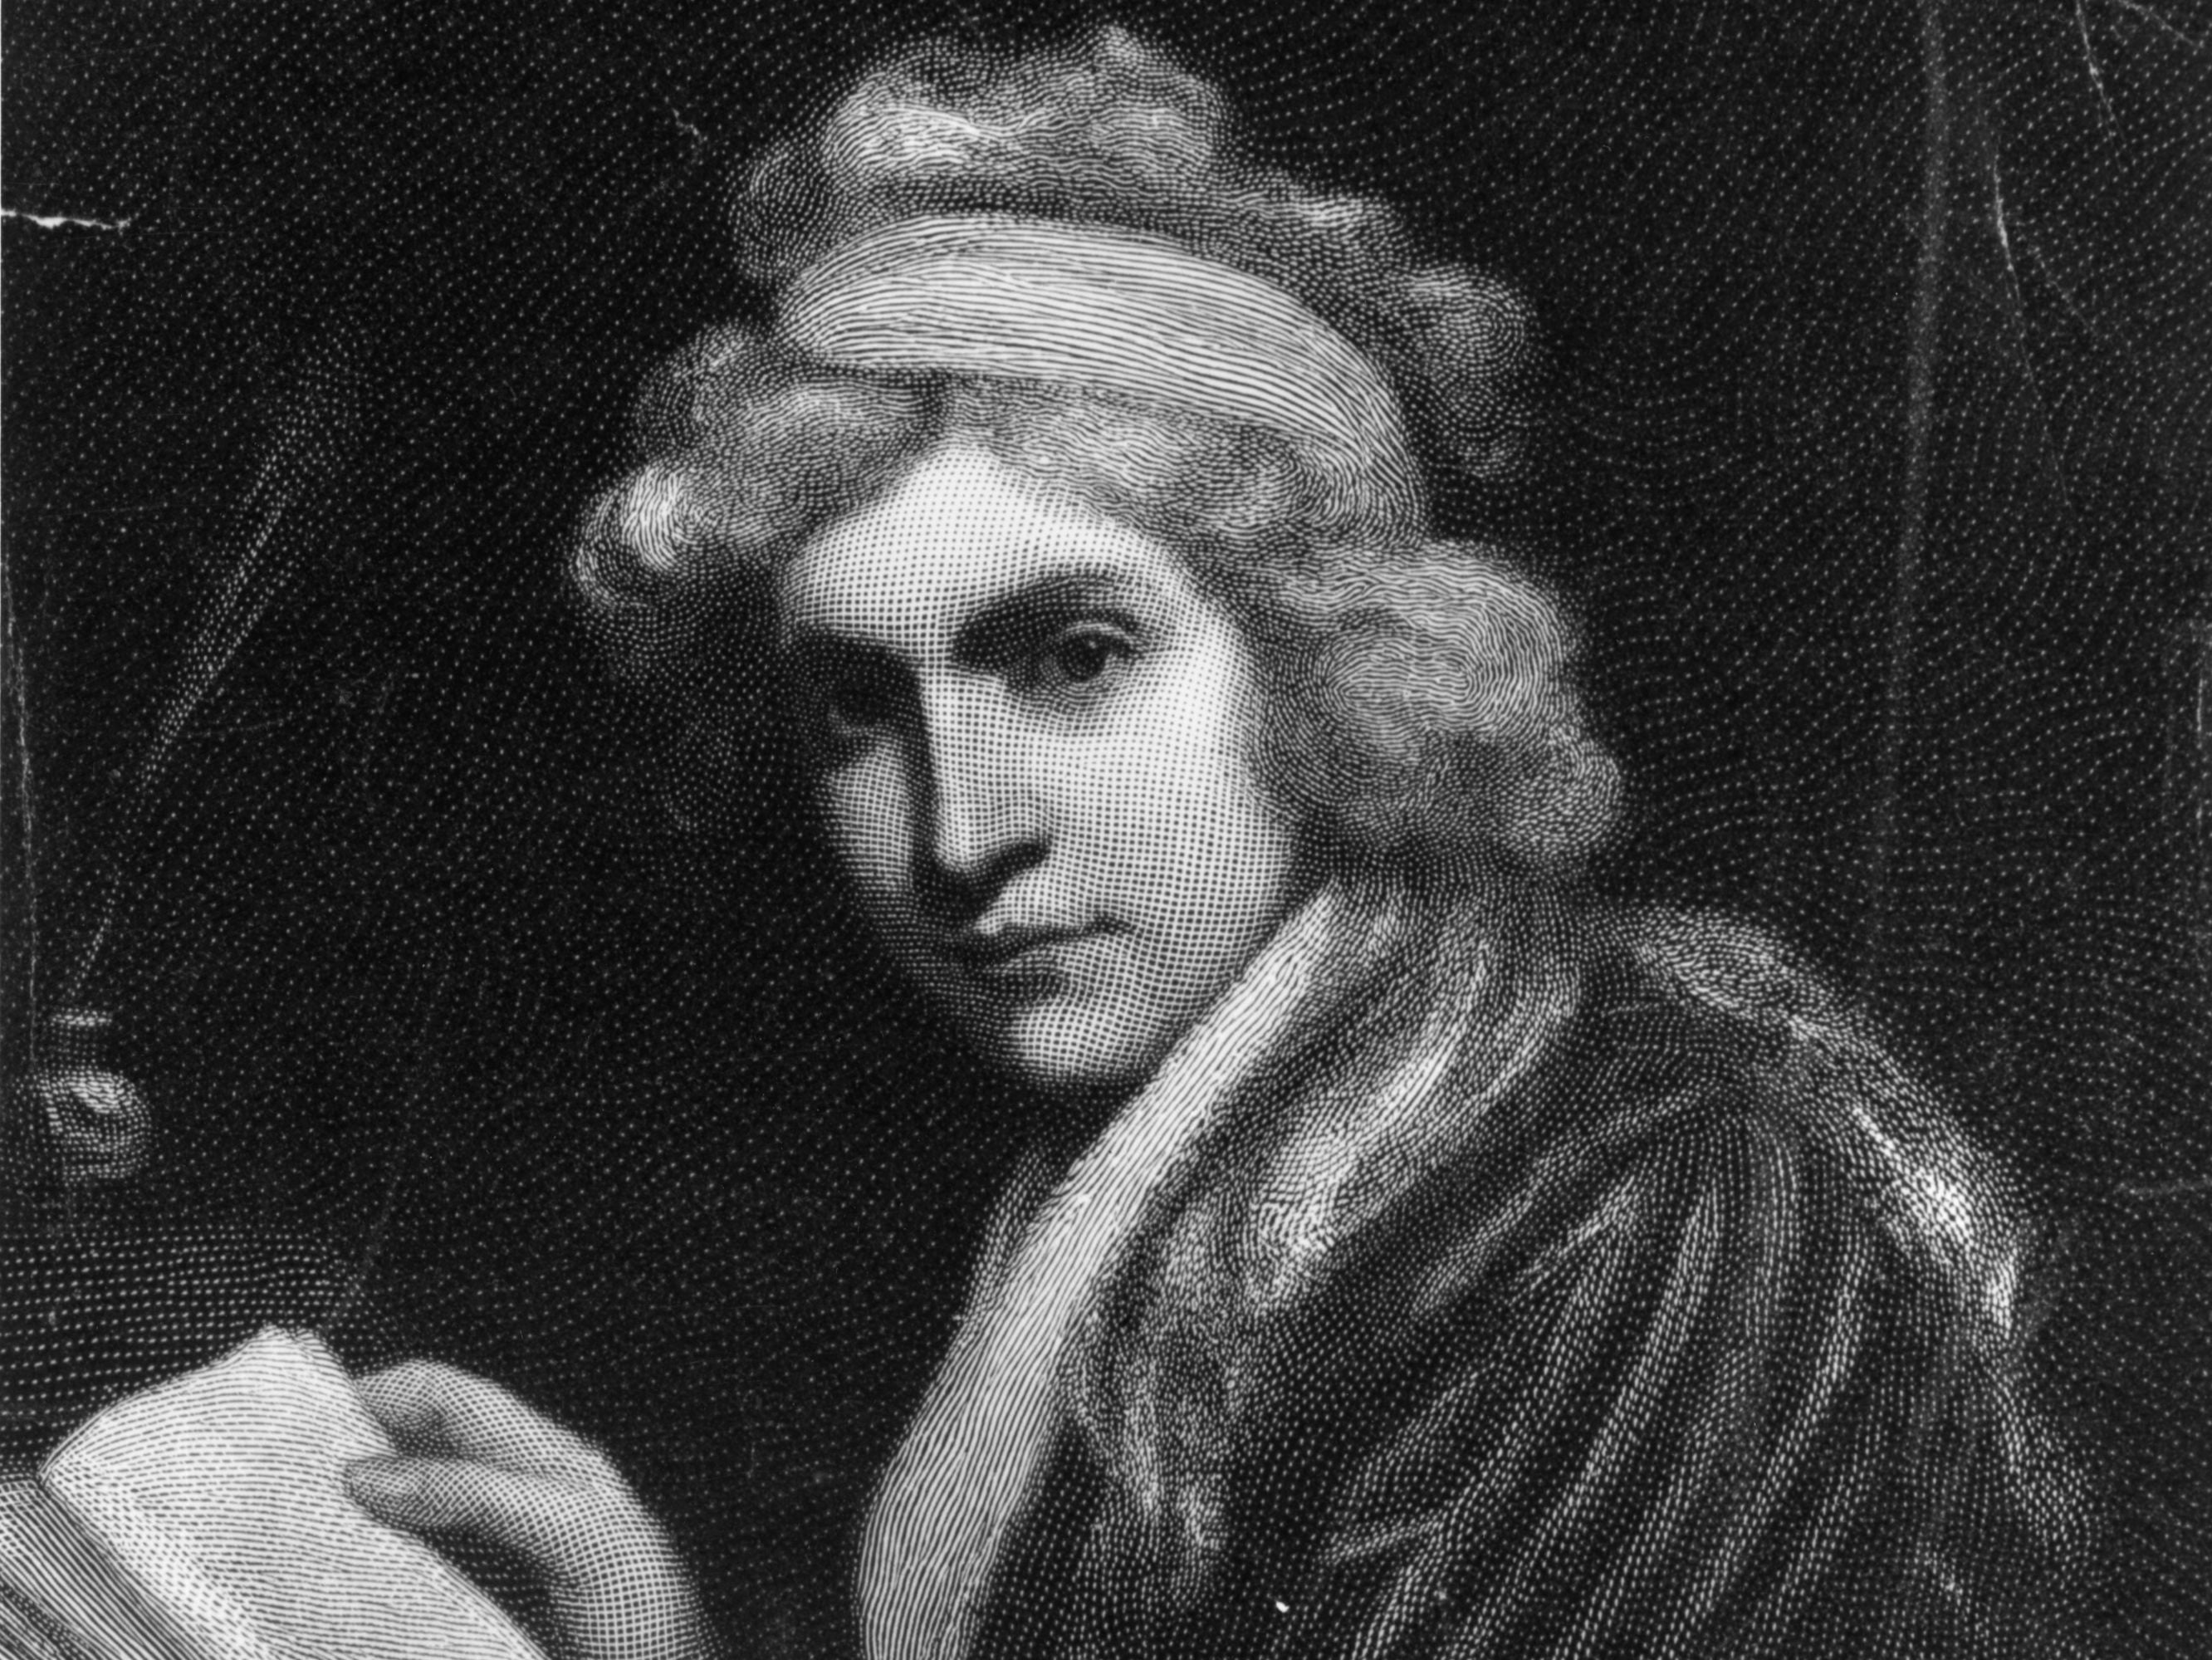 ‘The neglected education of my fellow creatures is the grand source of the misery I deplore,’ wrote Wollstonecraft